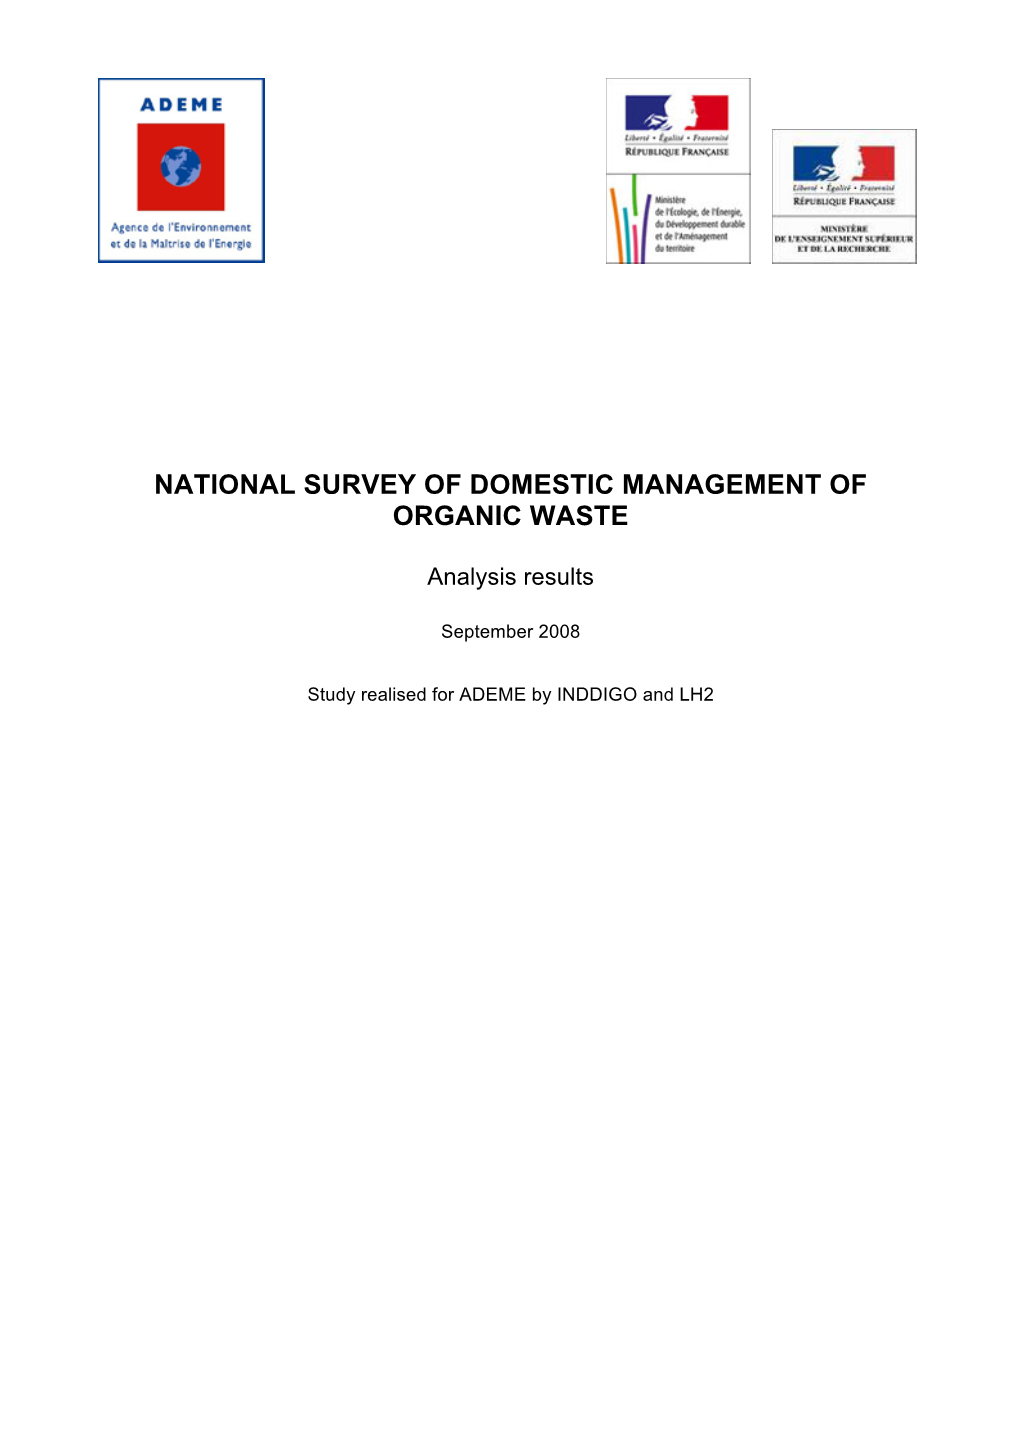 National Survey of Domestic Management of Organic Waste